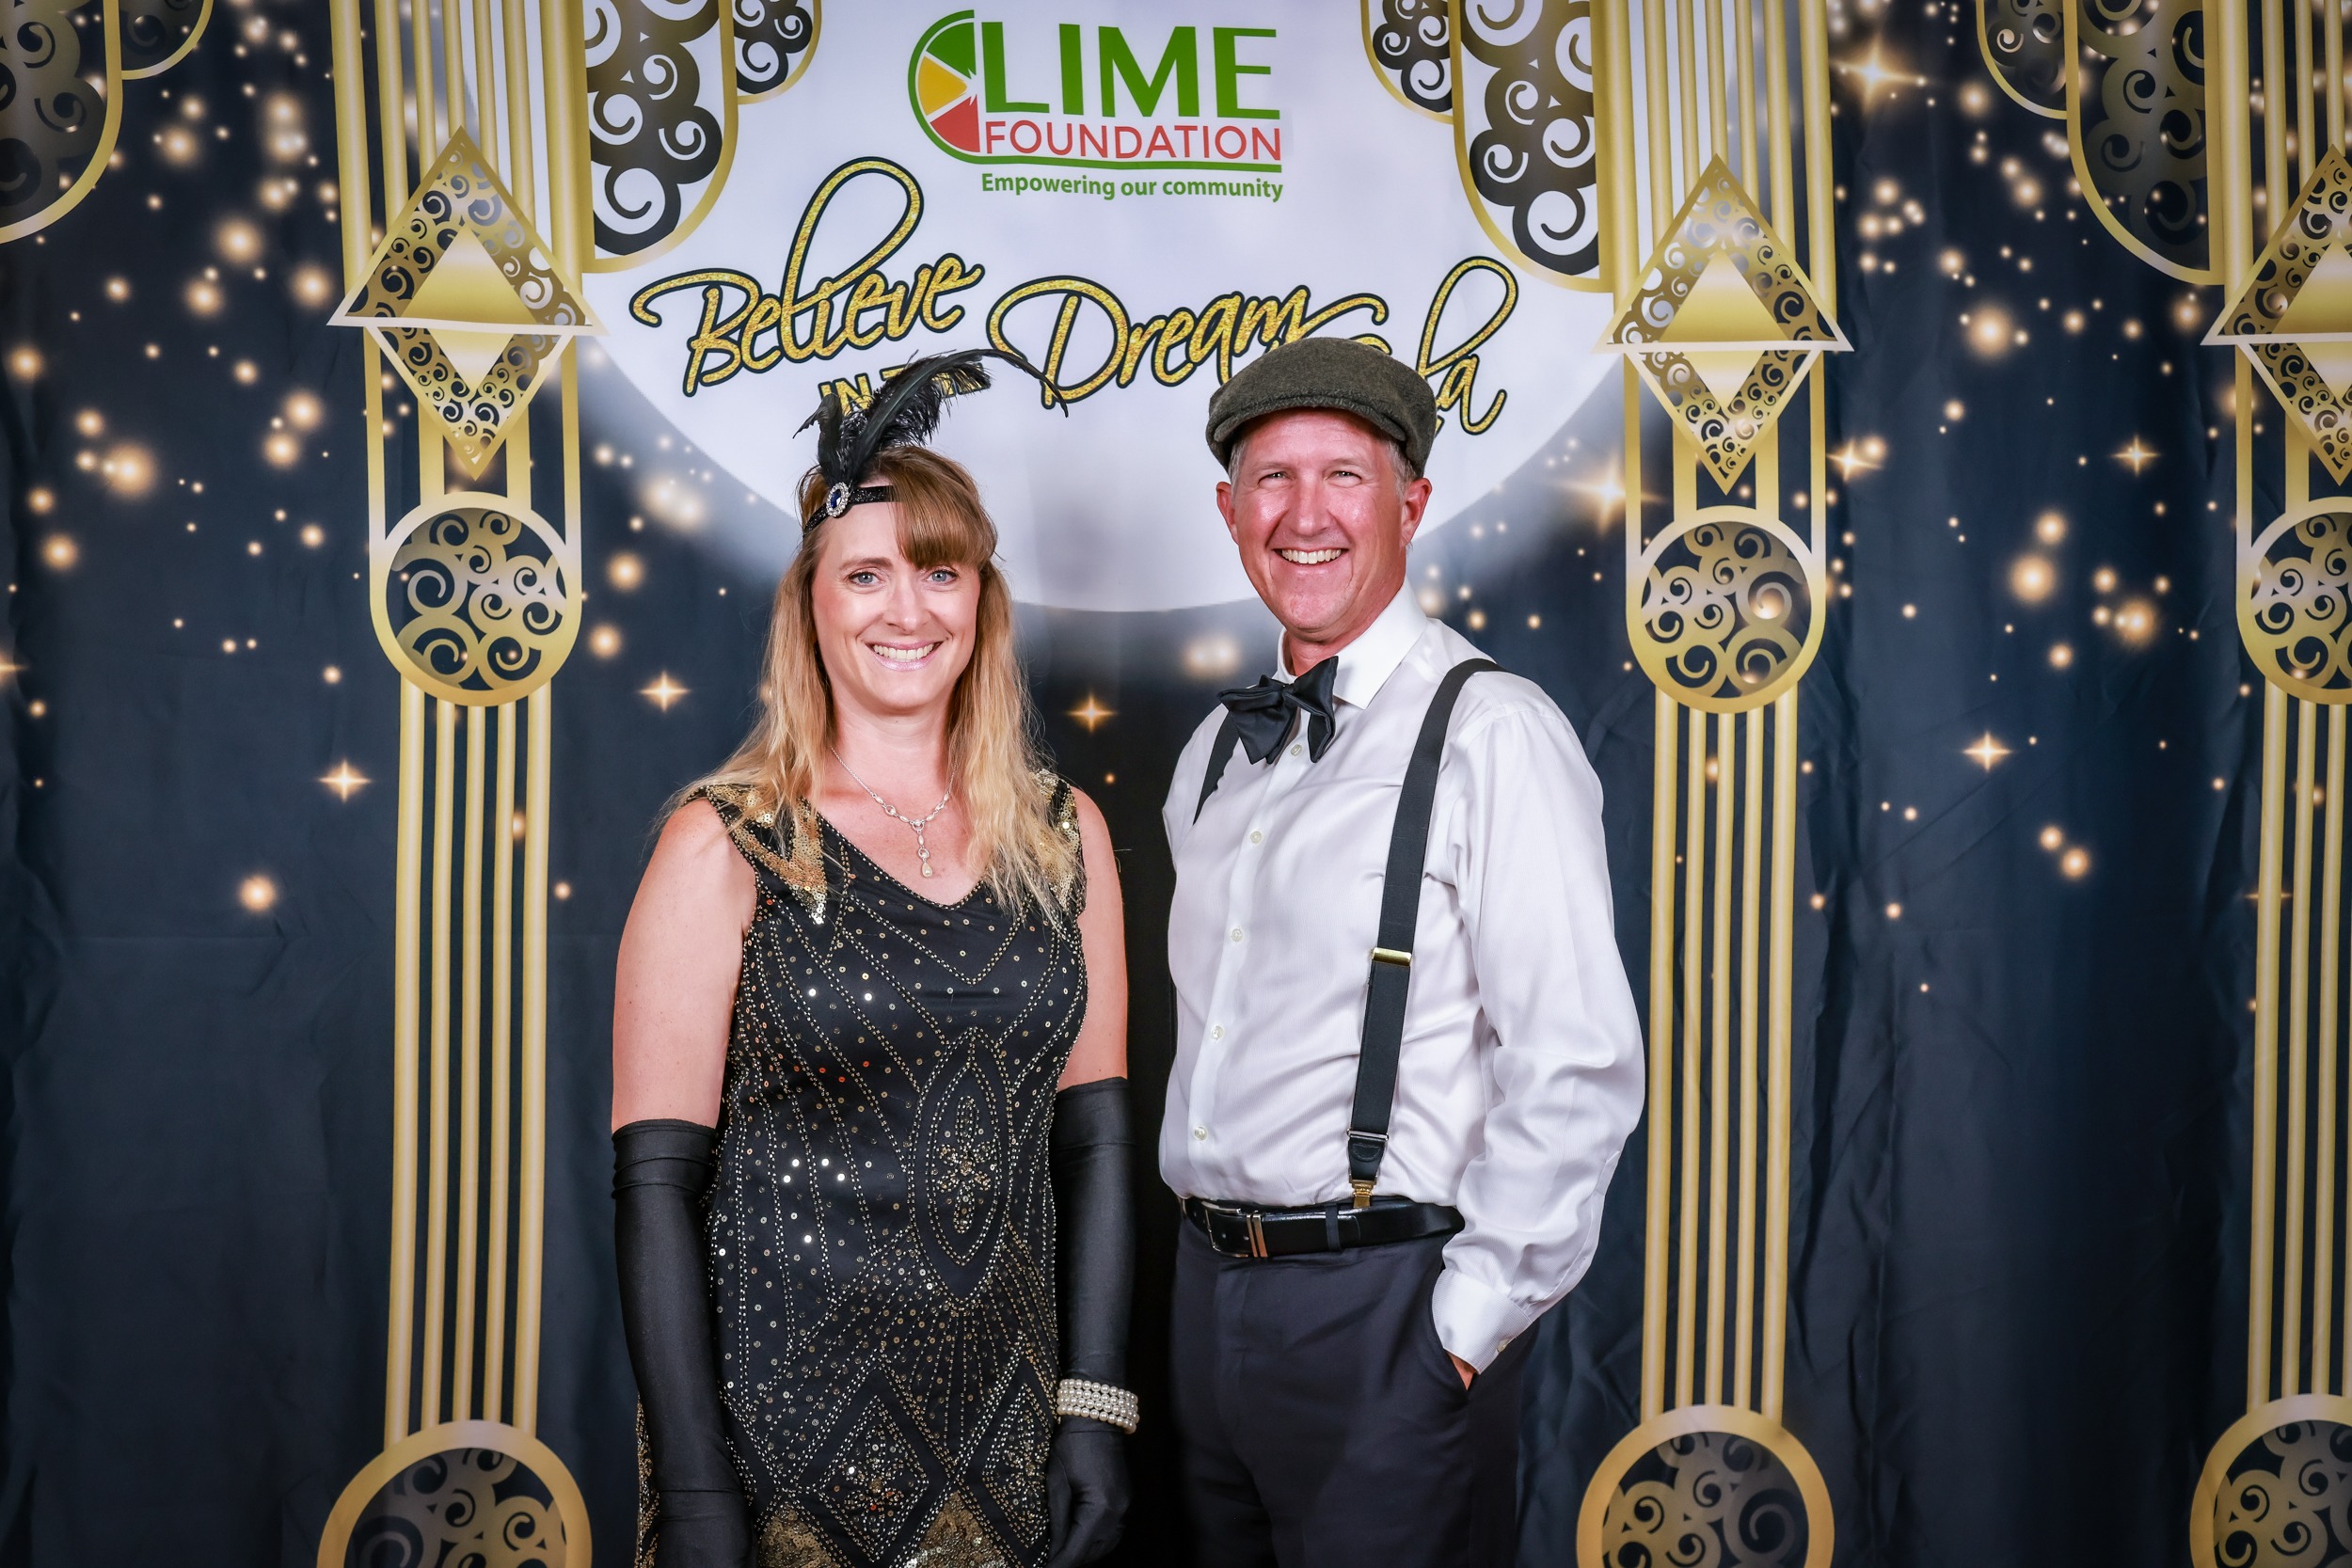 A man and woman posing for a photo at a 1920's themed party hosted by The LIME Foundation of Santa Rosa.